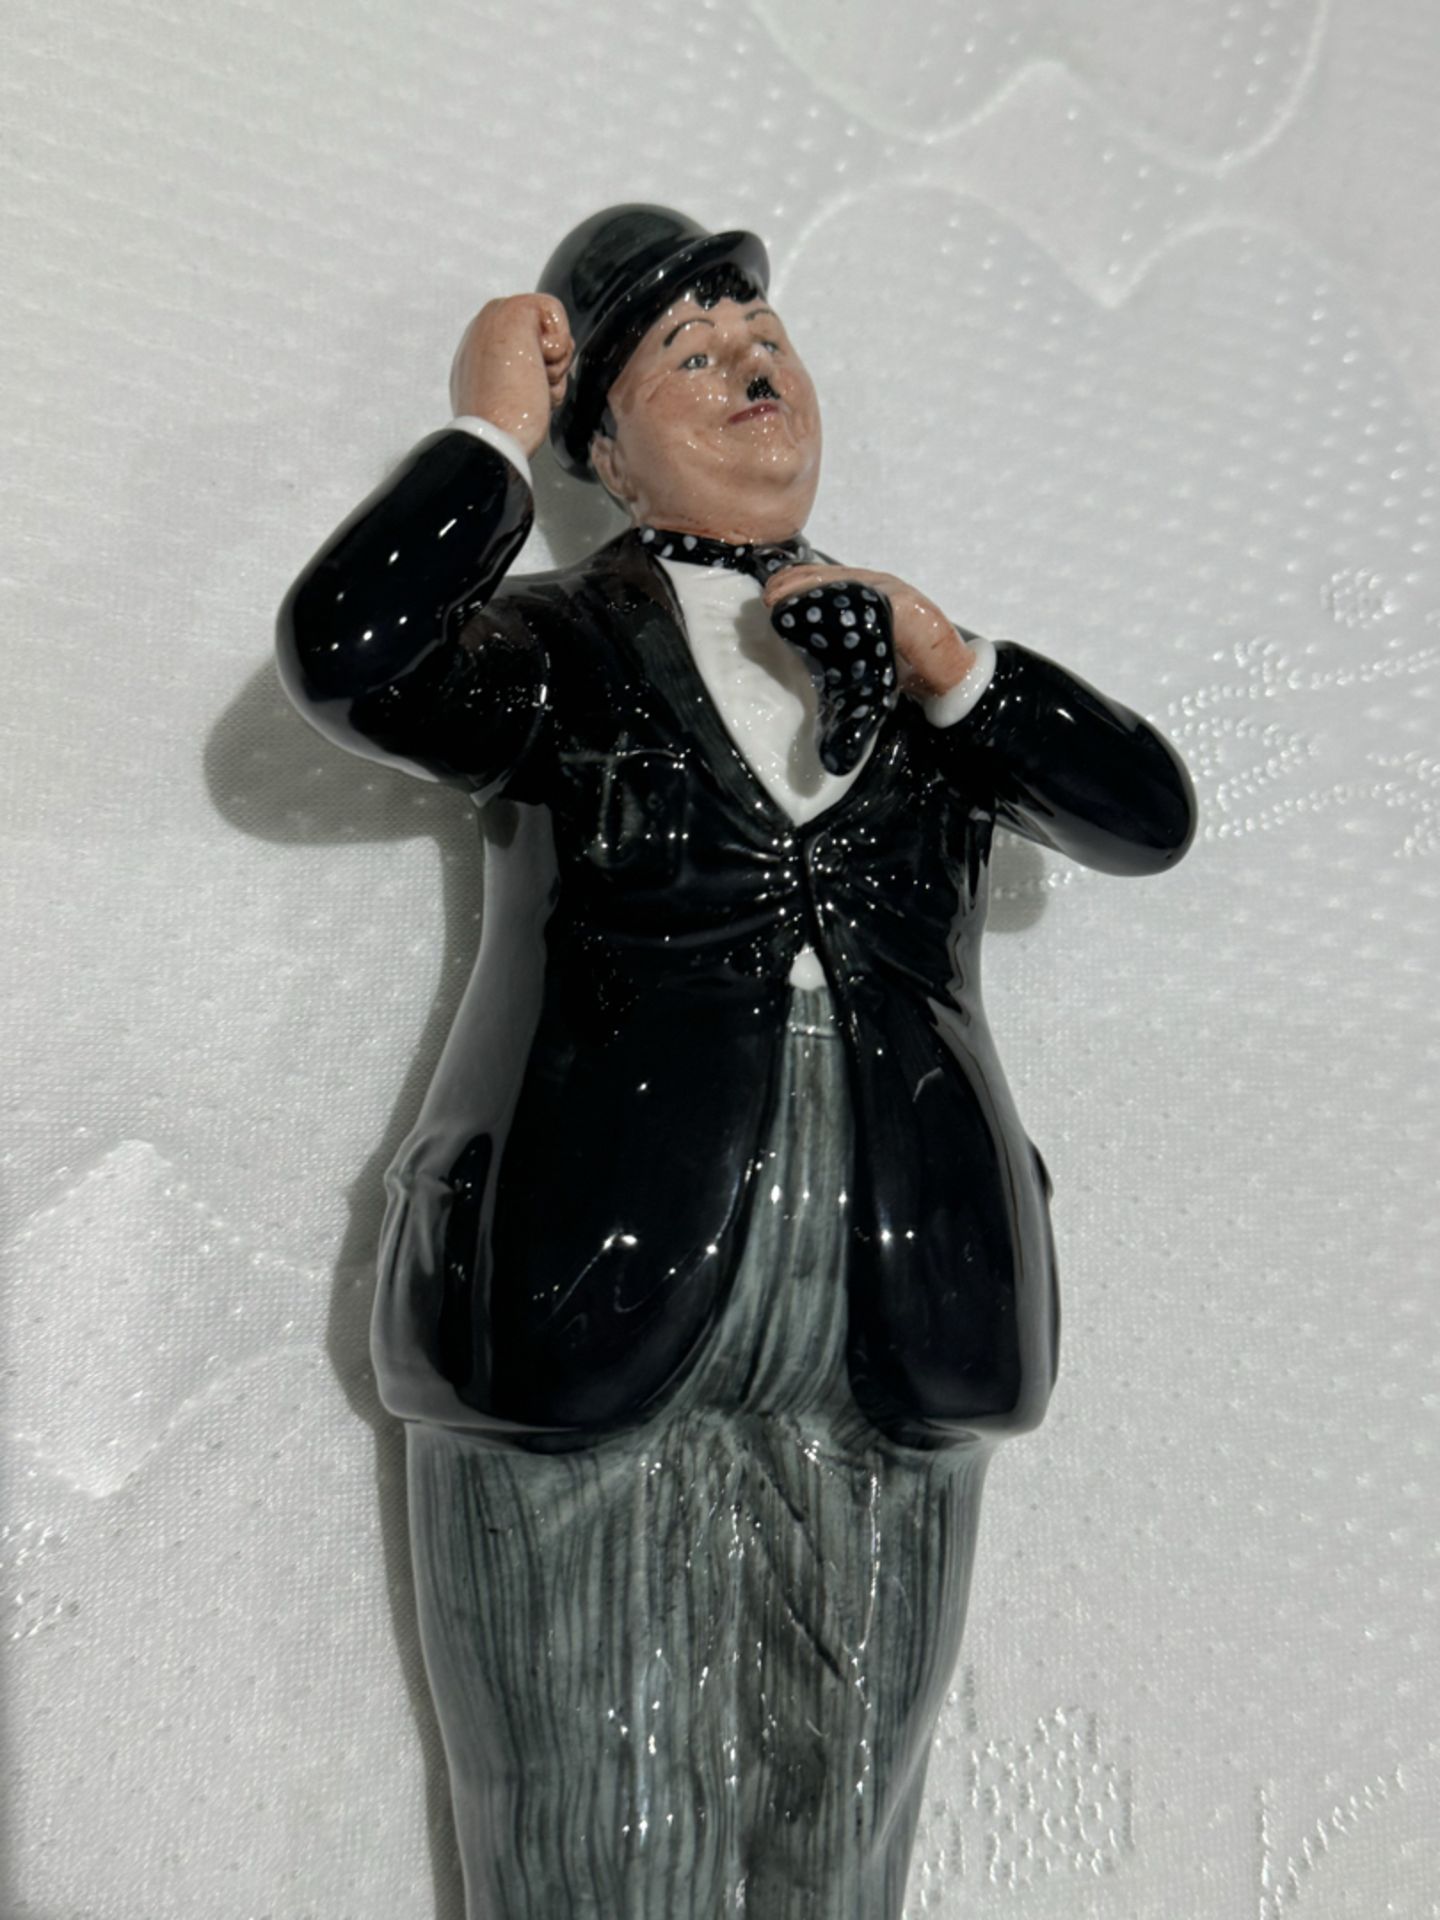 Limited Edition Royal Doulton 'Oliver Hardy' - HN 2775 - Ltd Edition of 9500 - Fine China - Image 2 of 3